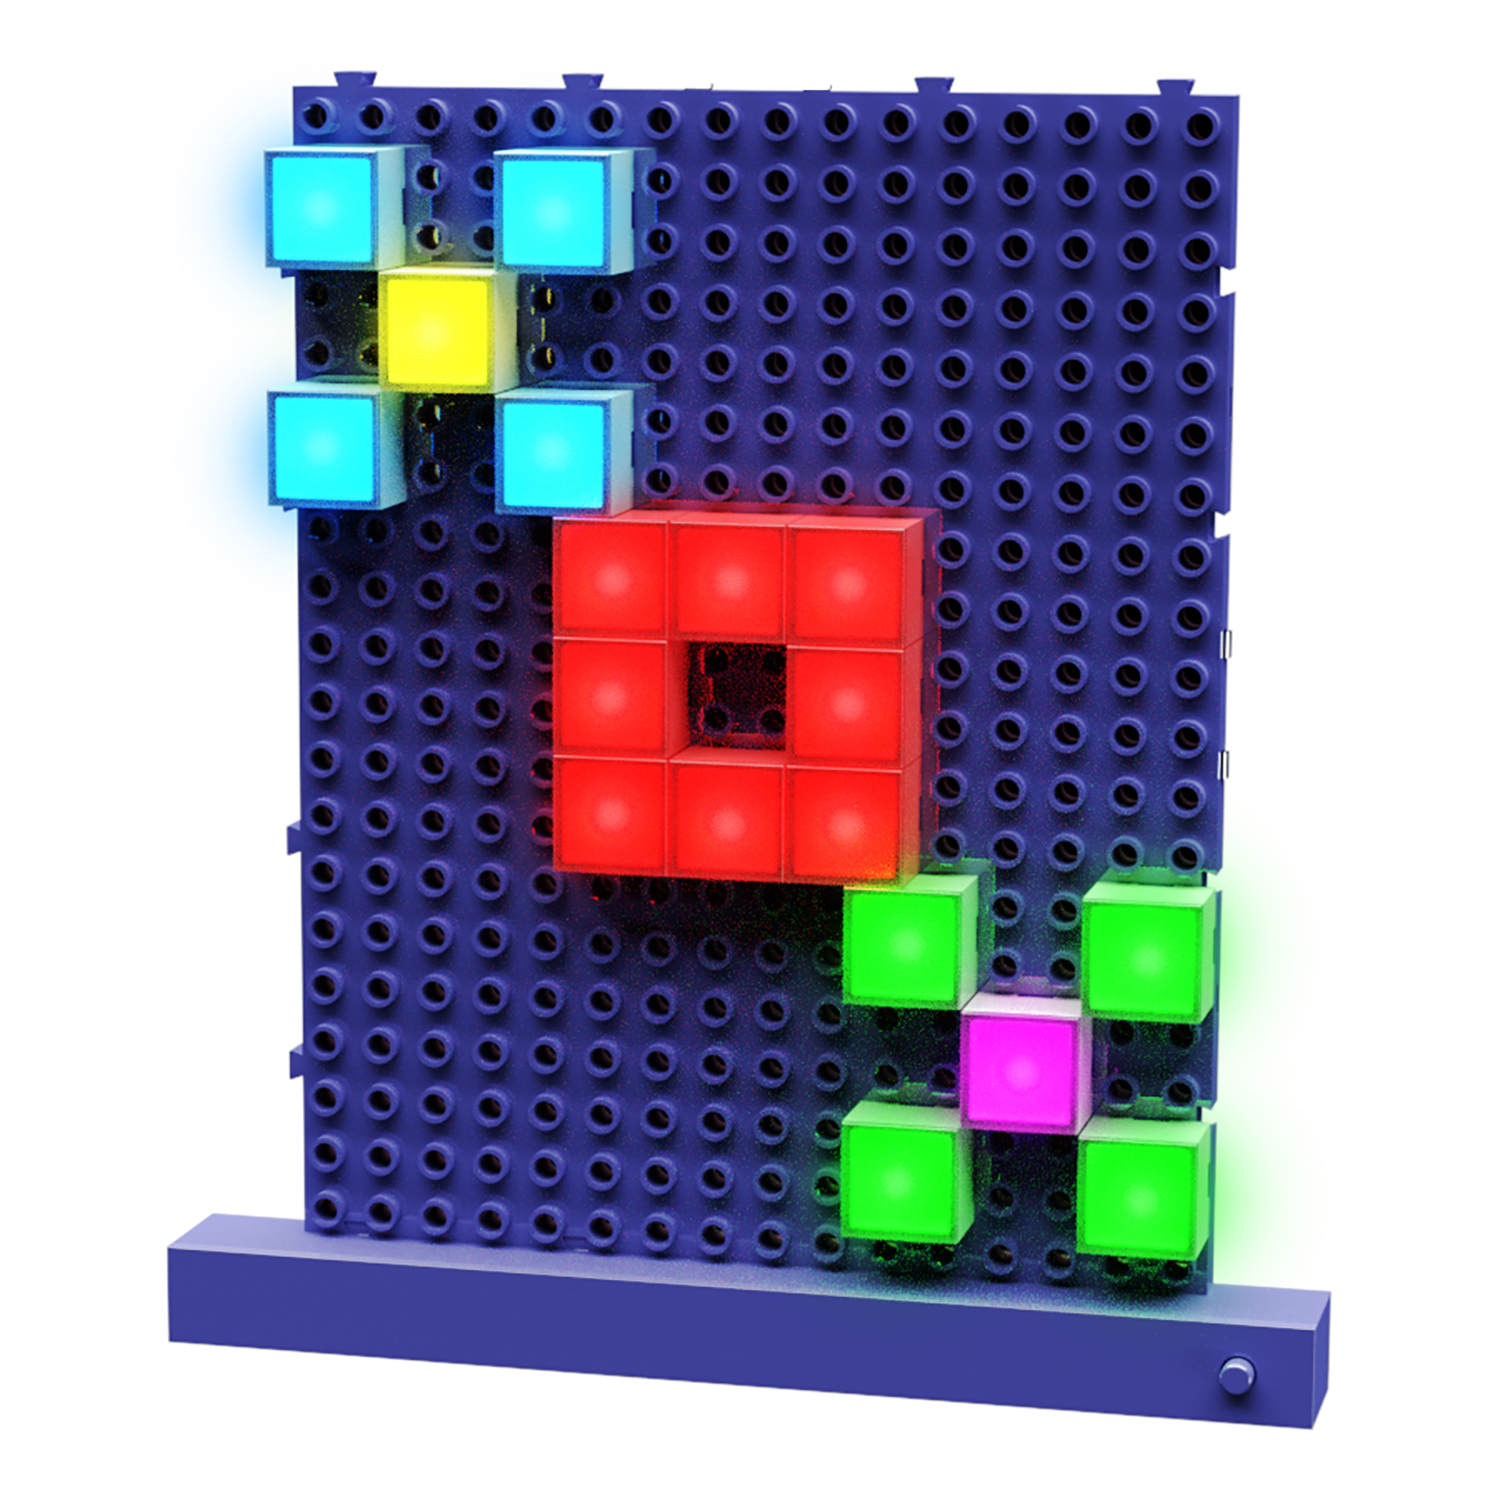 E-Blox Lite Blox Student Set image number null